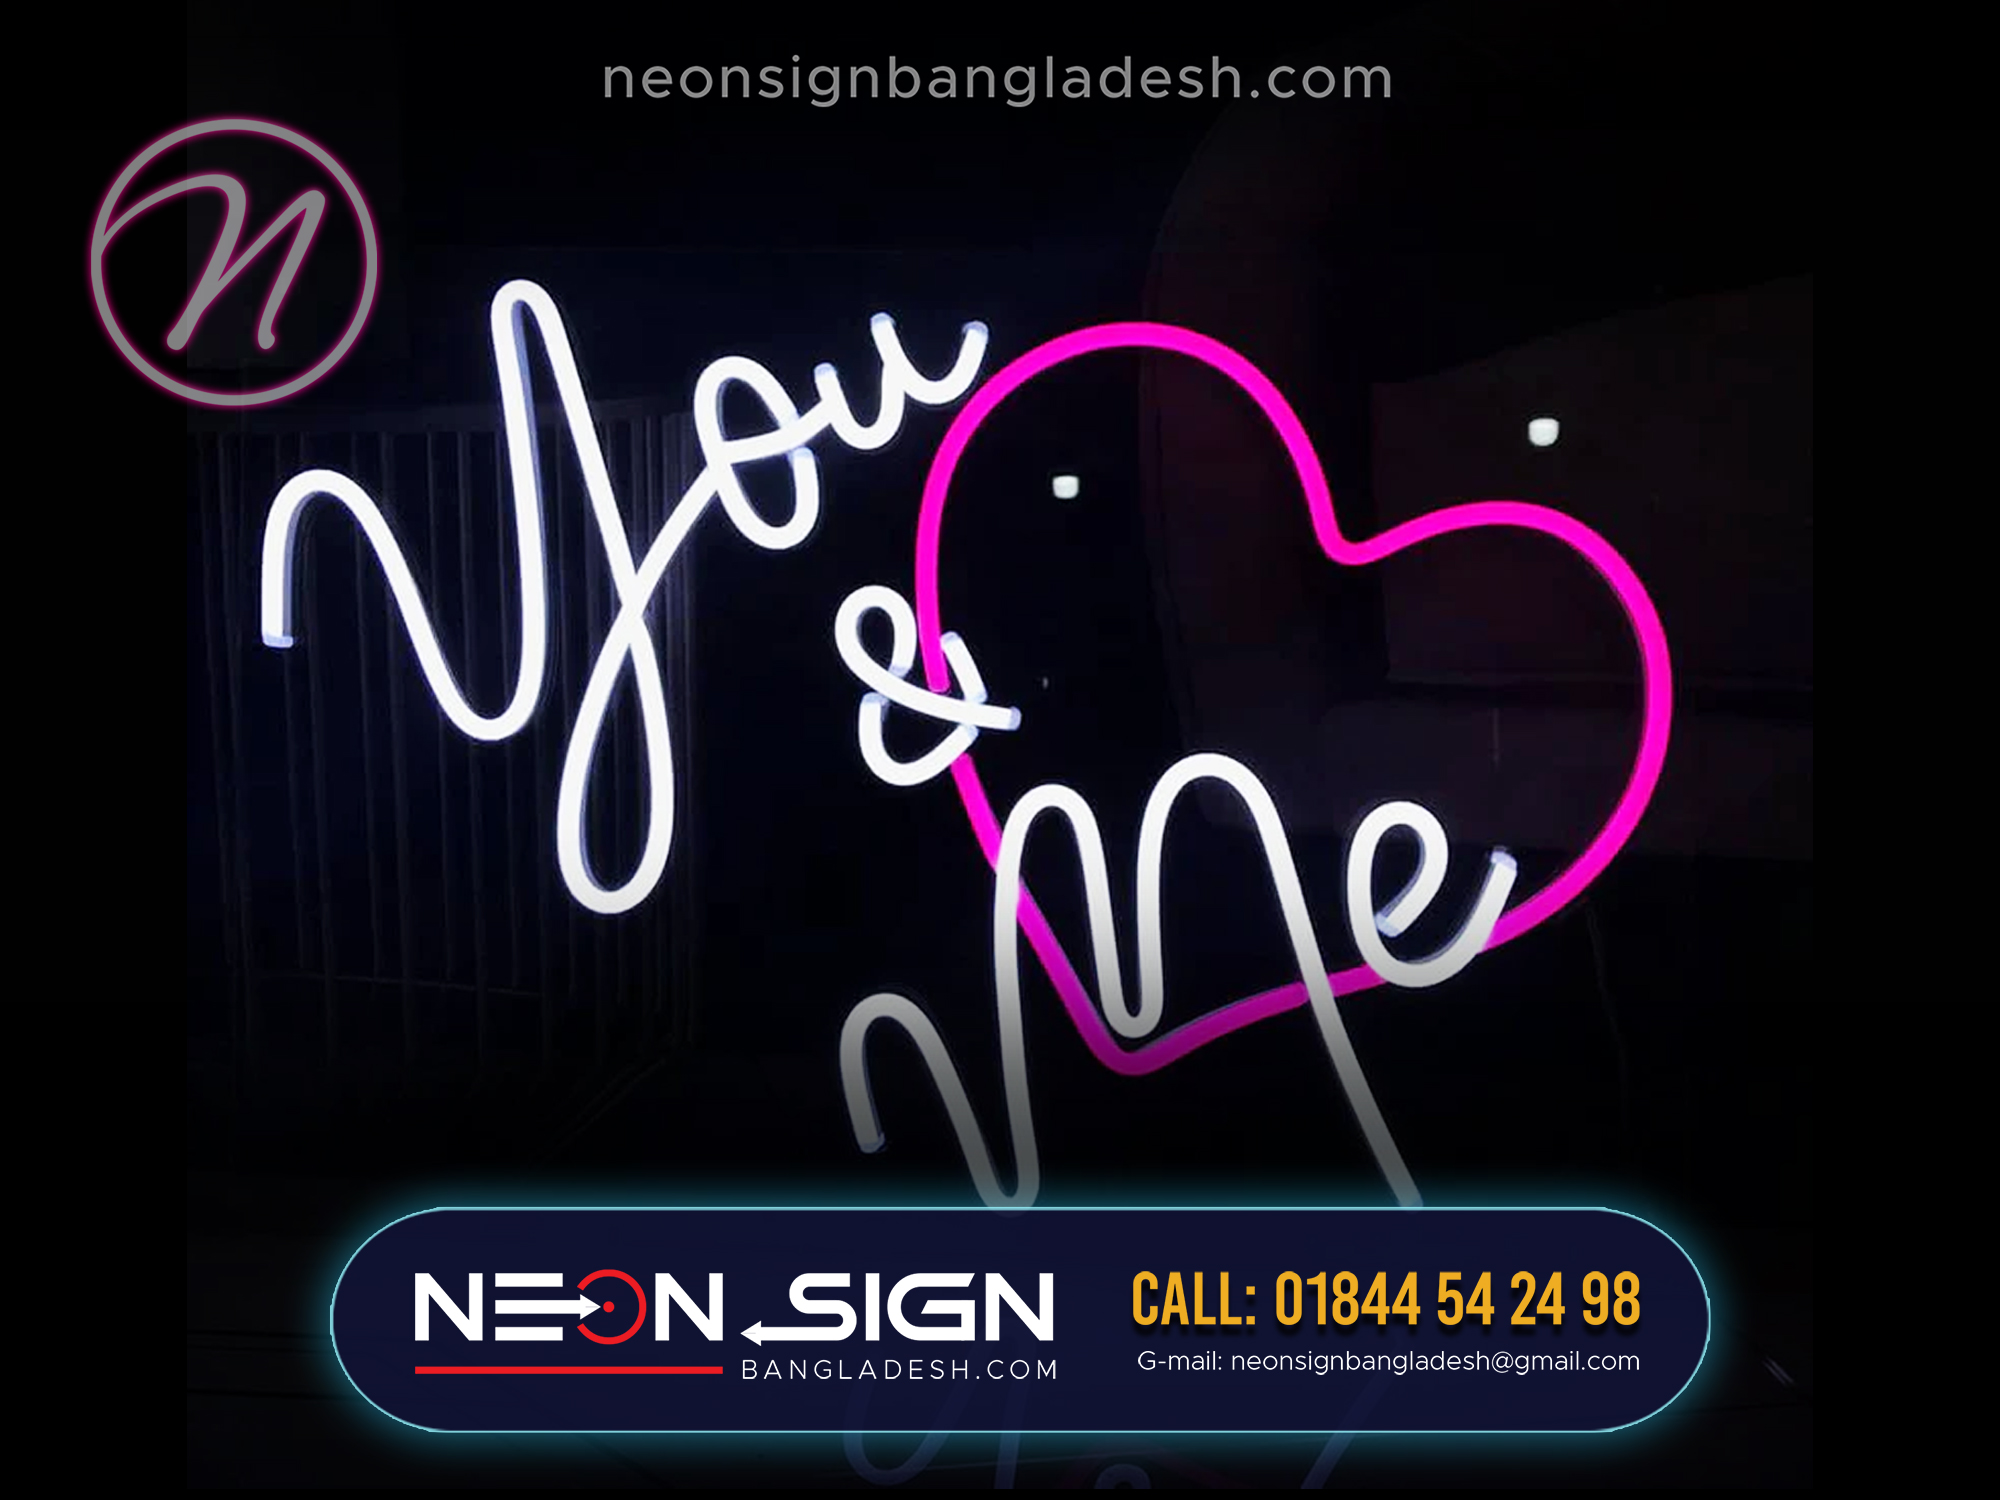 Neon directional signs bd price. neon sign board price in bangladesh. bangladesh neon sign. custom neon signs bd. led sign bd. neon flexible strip light price in bangladesh. led sign board price in bangladesh. signage bd.